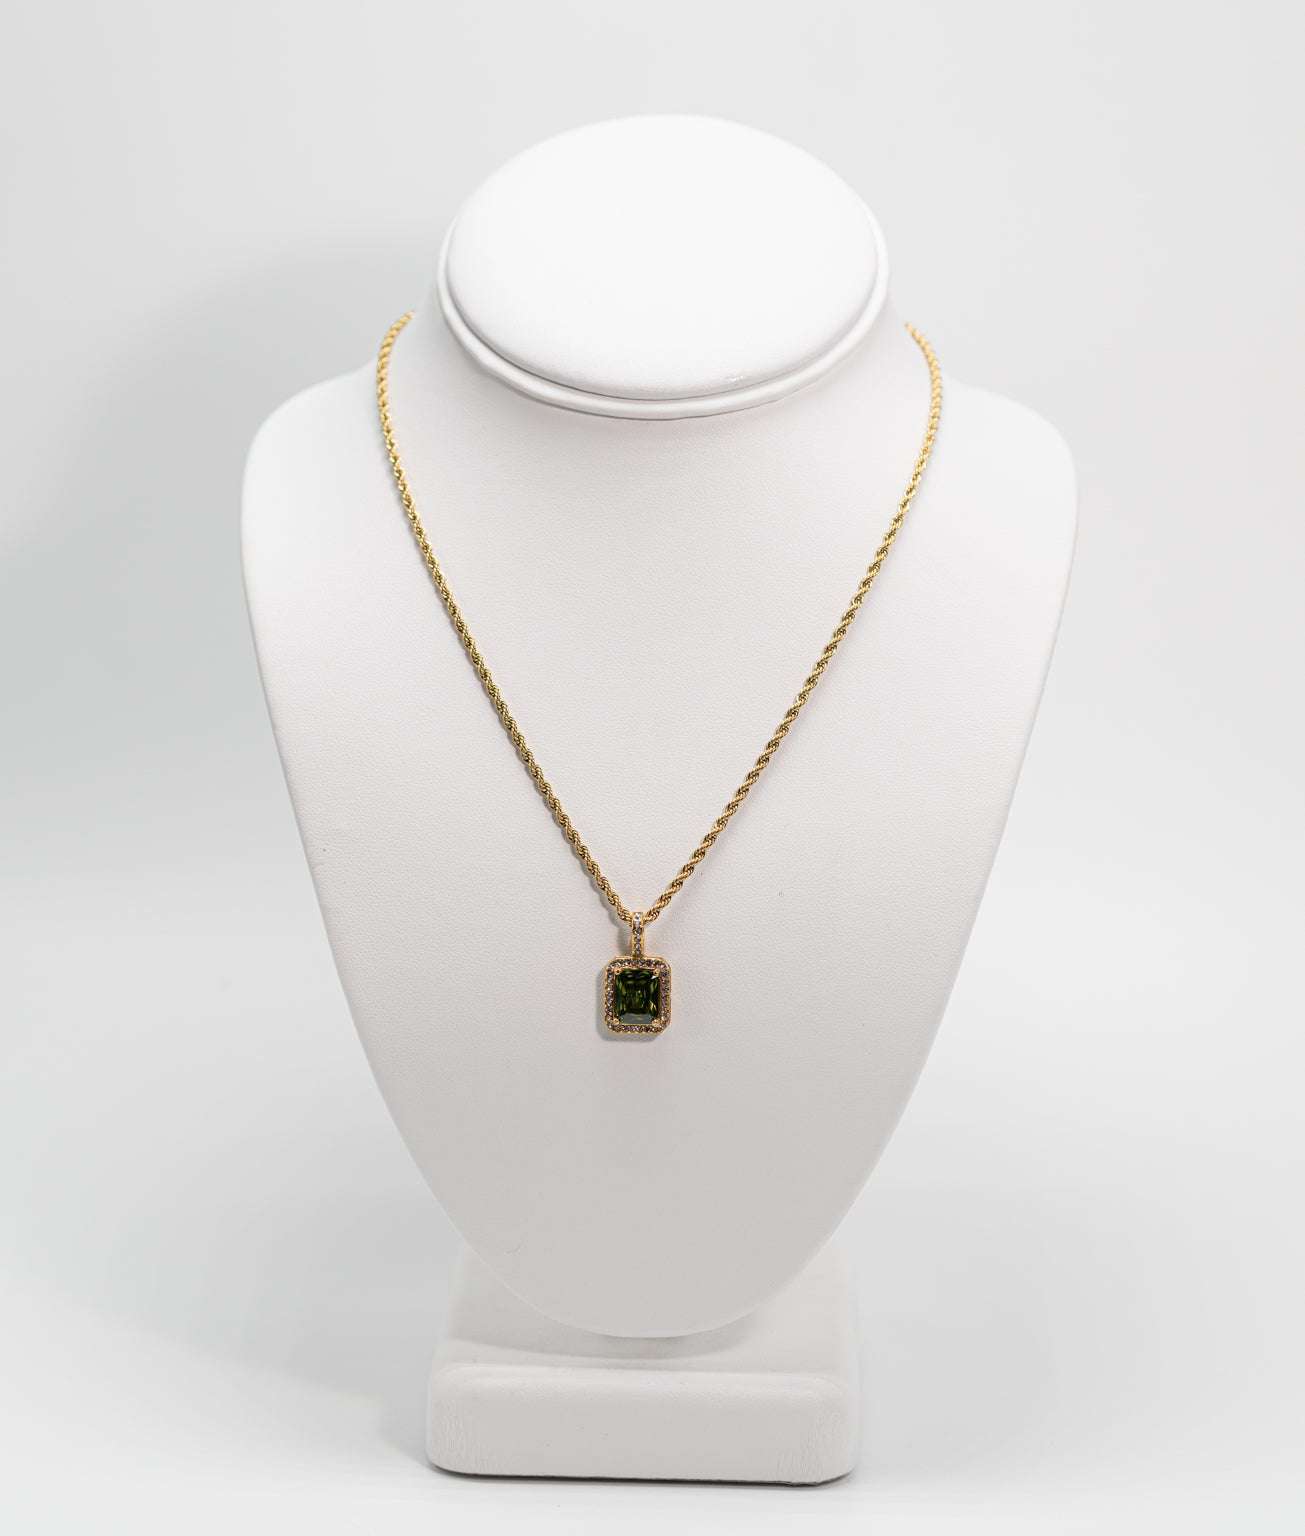 Stainless Steel Green Crystal Necklace for Her